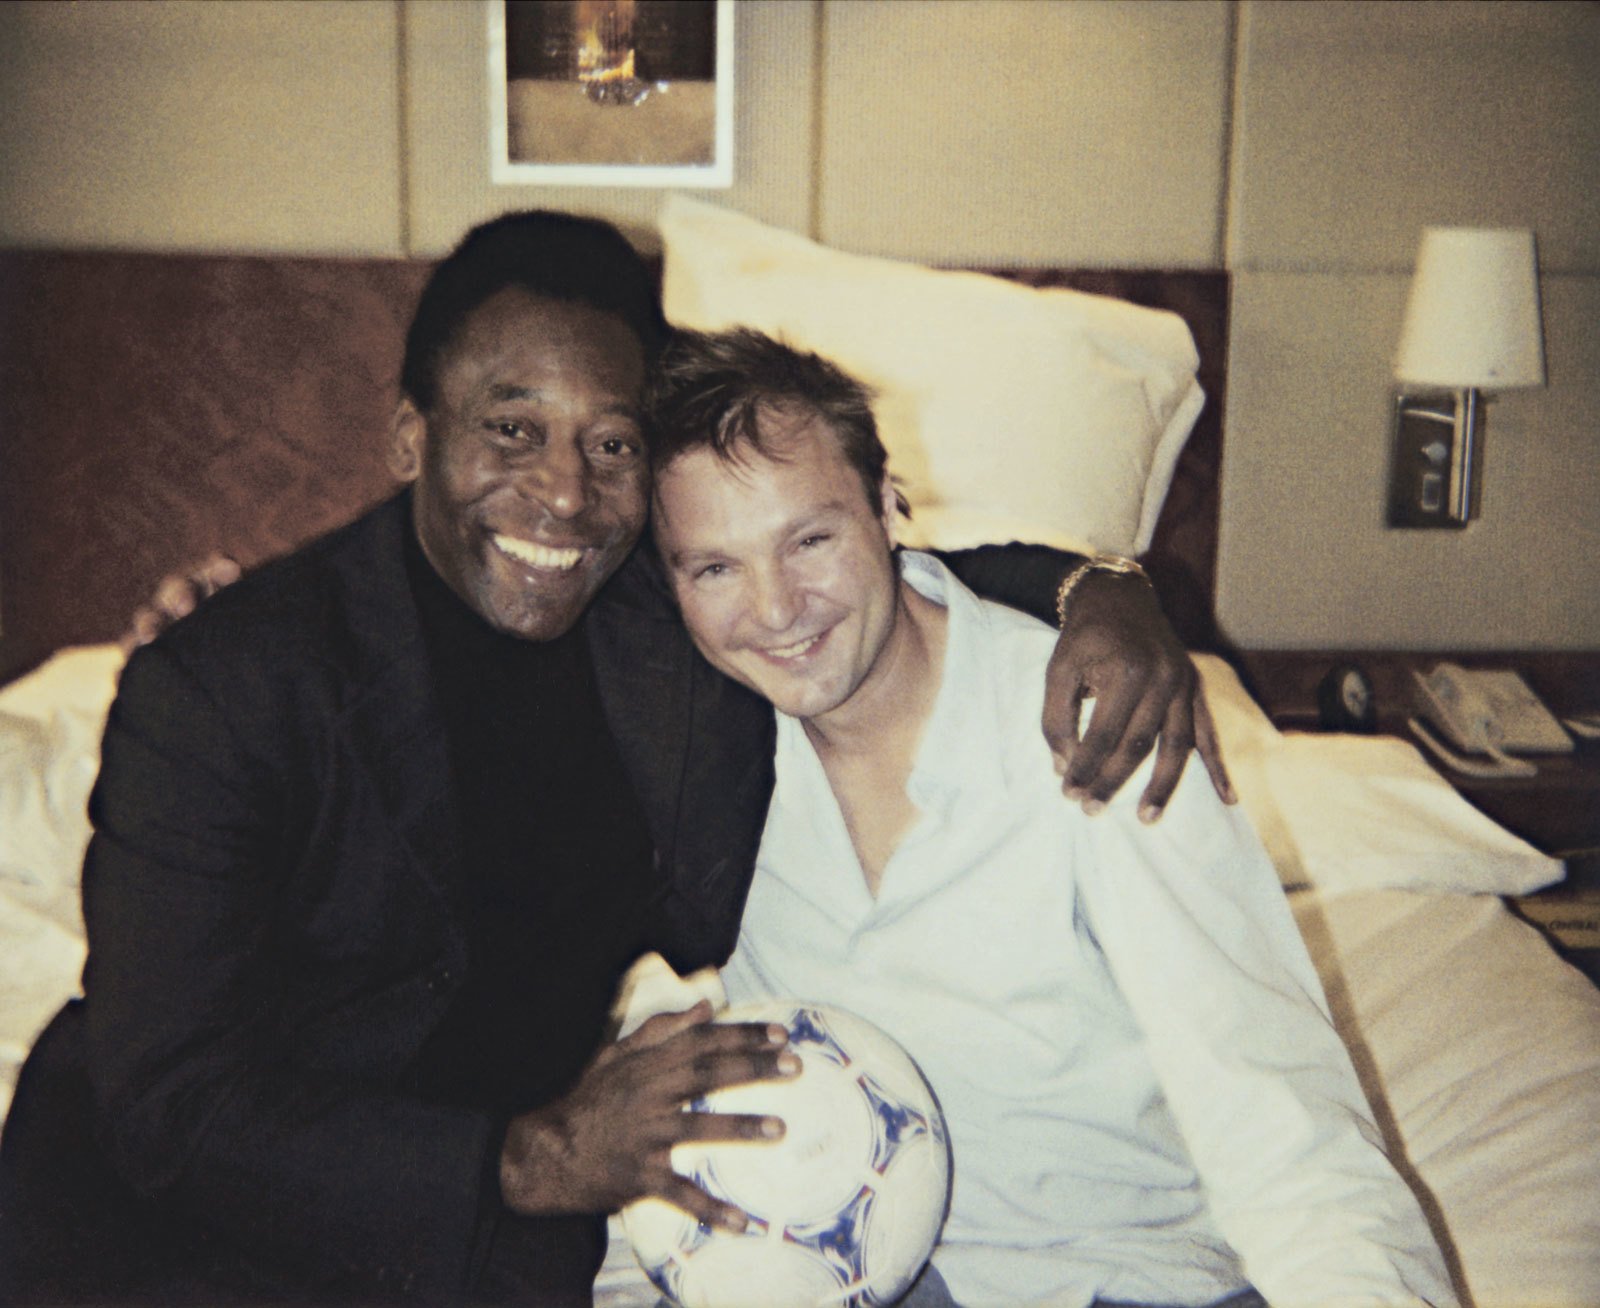 Juergen Teller, Pele and Me, London, 2003&copy; 2003 Juergen Teller, All Rights Reserved